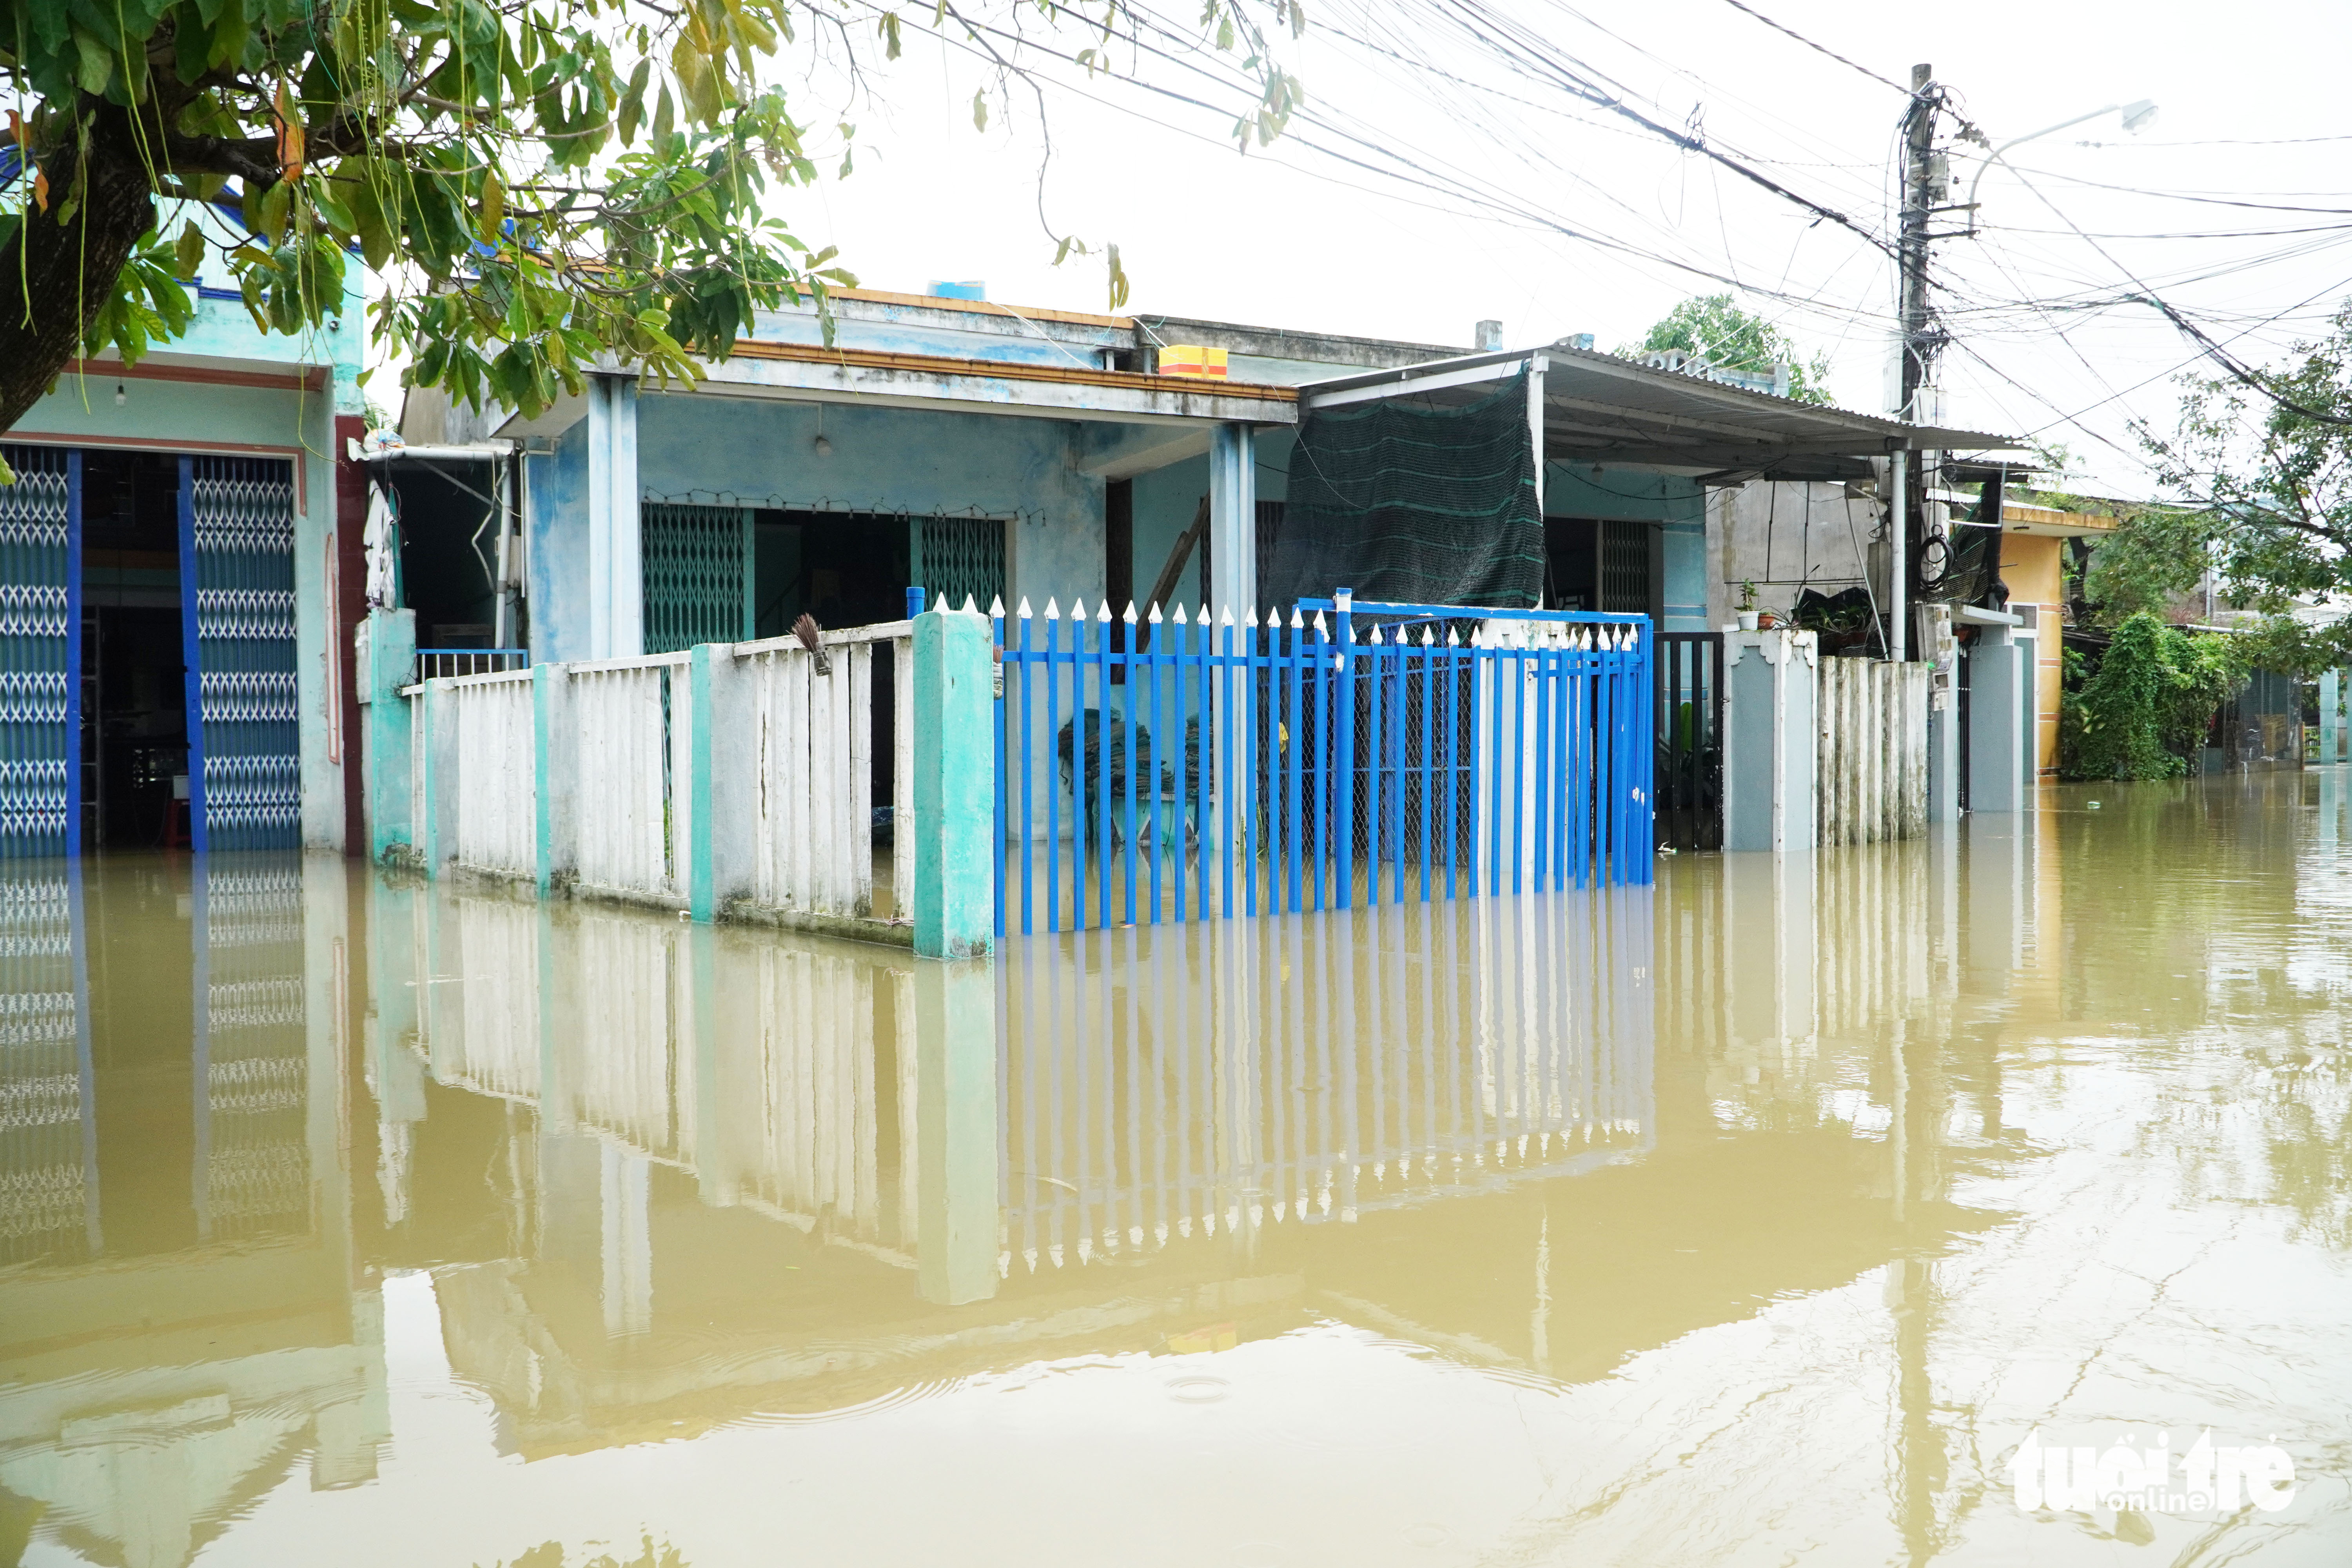 A flooded neighborhood in Quang Nam Province, Vietnam, October 11, 2022. Photo: Le Trung / Tuoi Tre